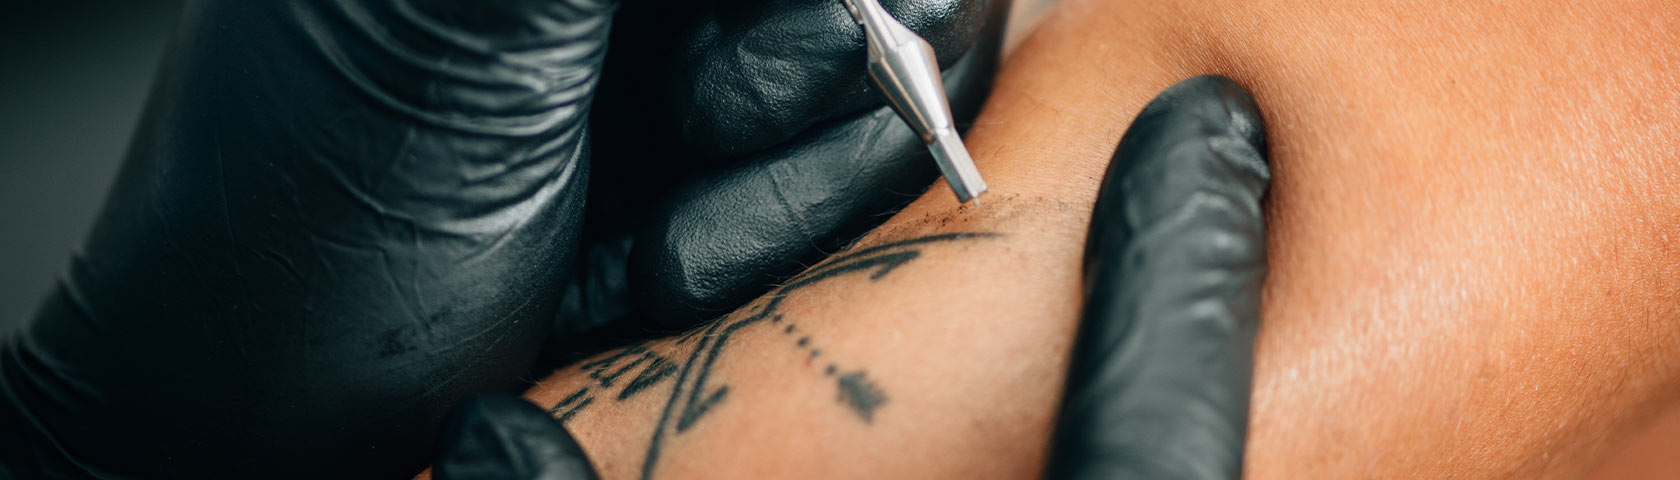 I'm going to change, why can't my body?': tattoo removal grows up | Tattoos  | The Guardian